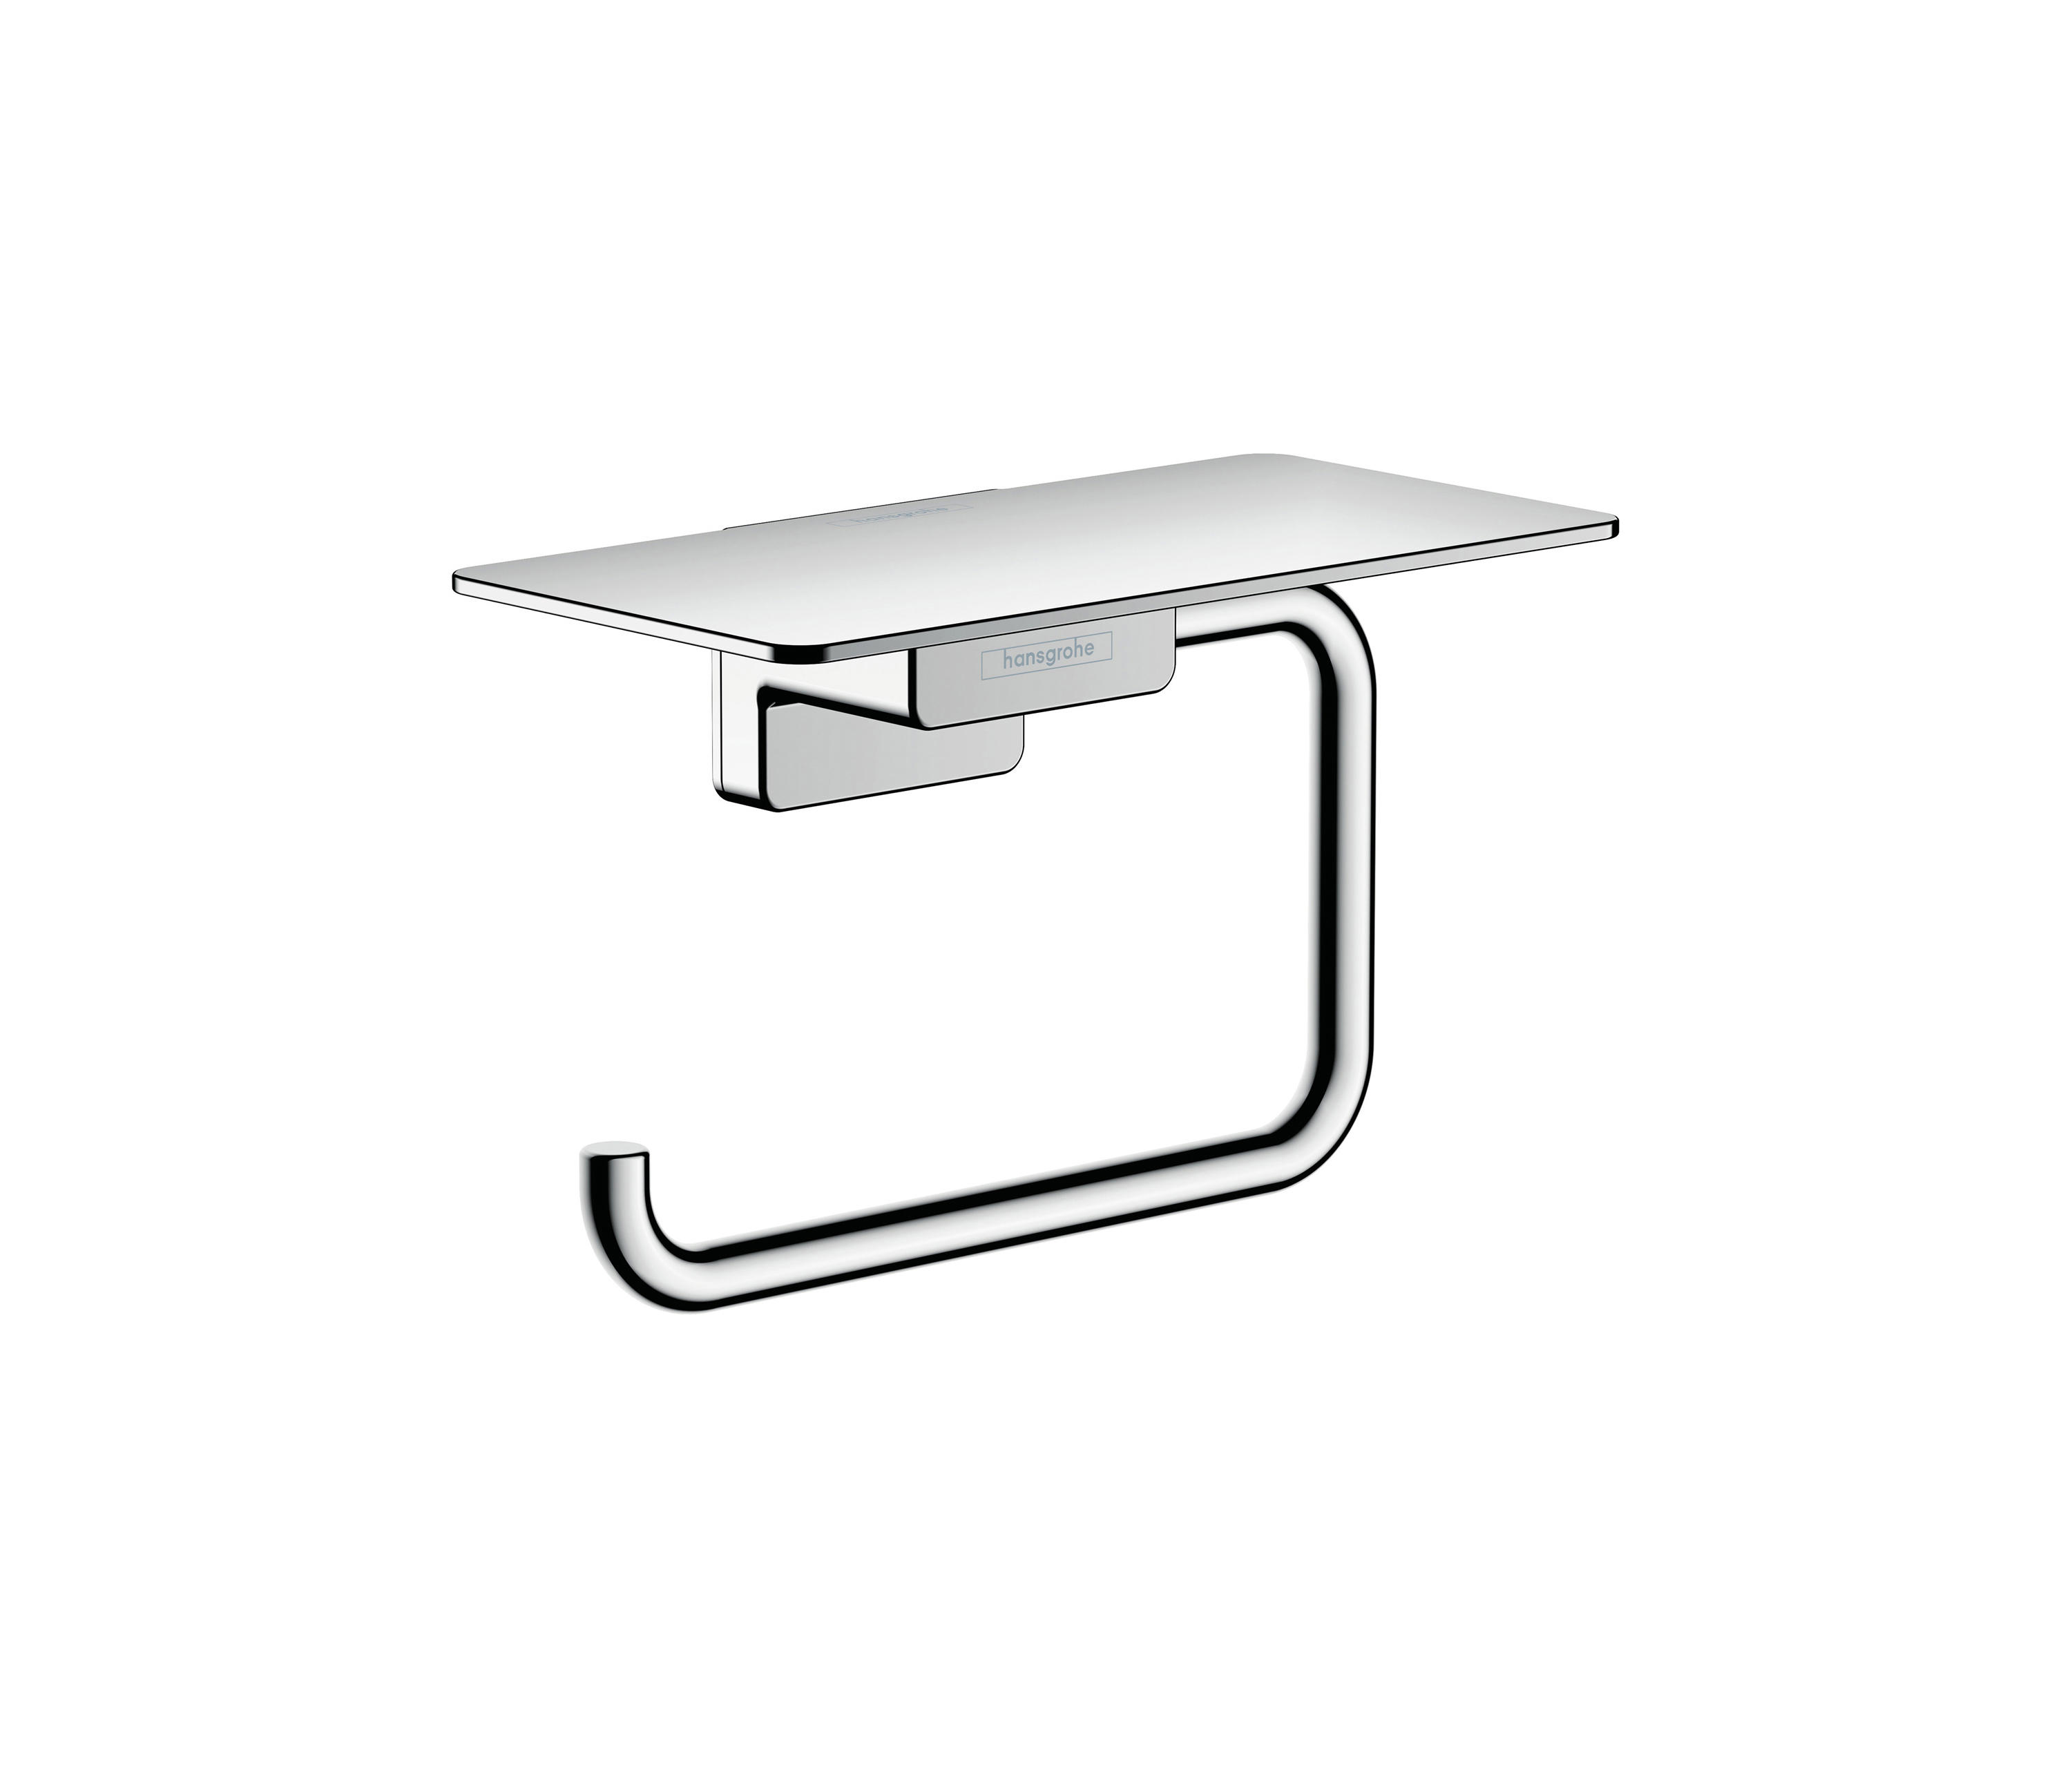 hansgrohe AddStoris Roll holder with shelf | Architonic